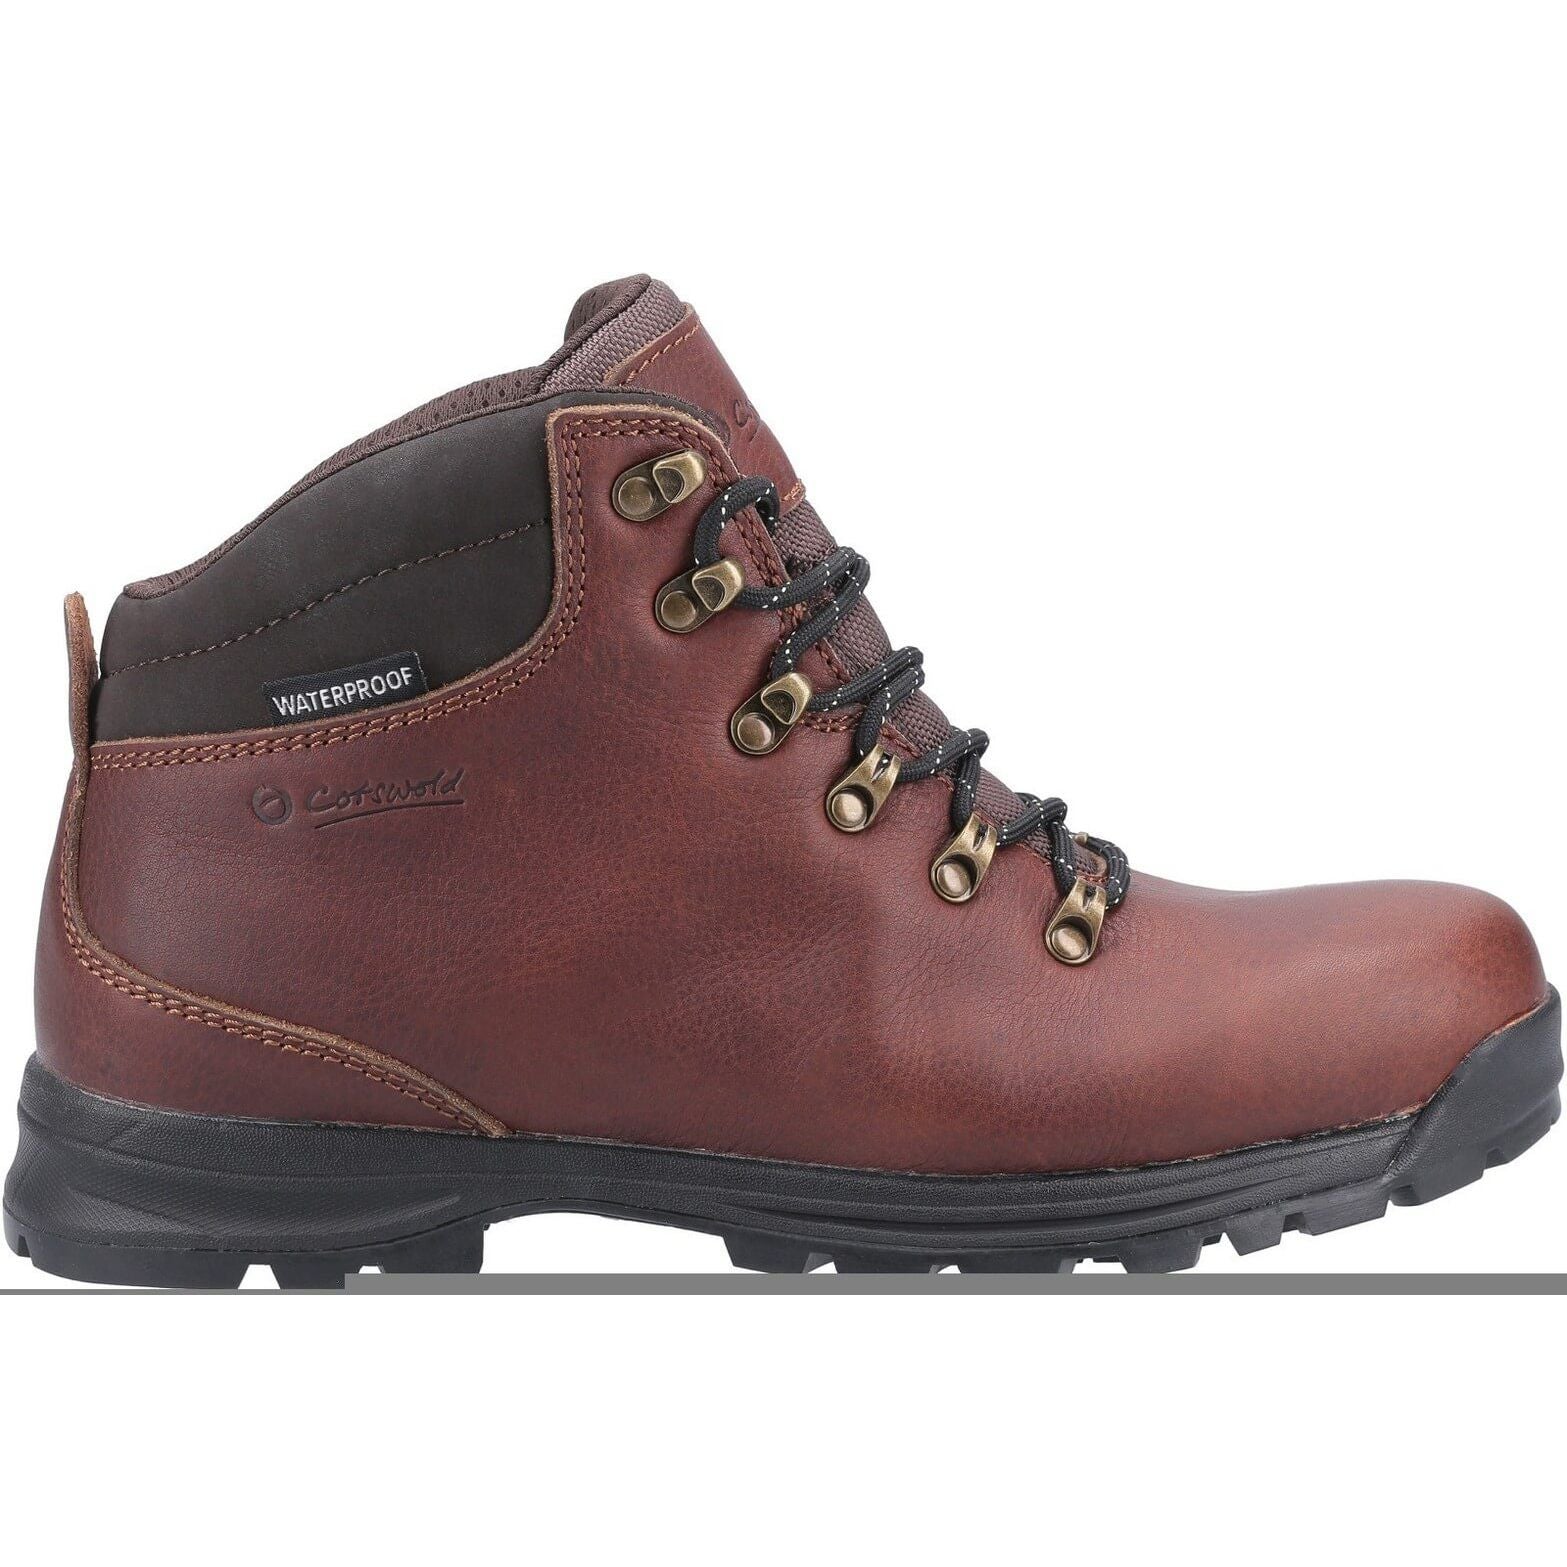 Cotswold Kingsway Hiking Shoes - Mens - Sale